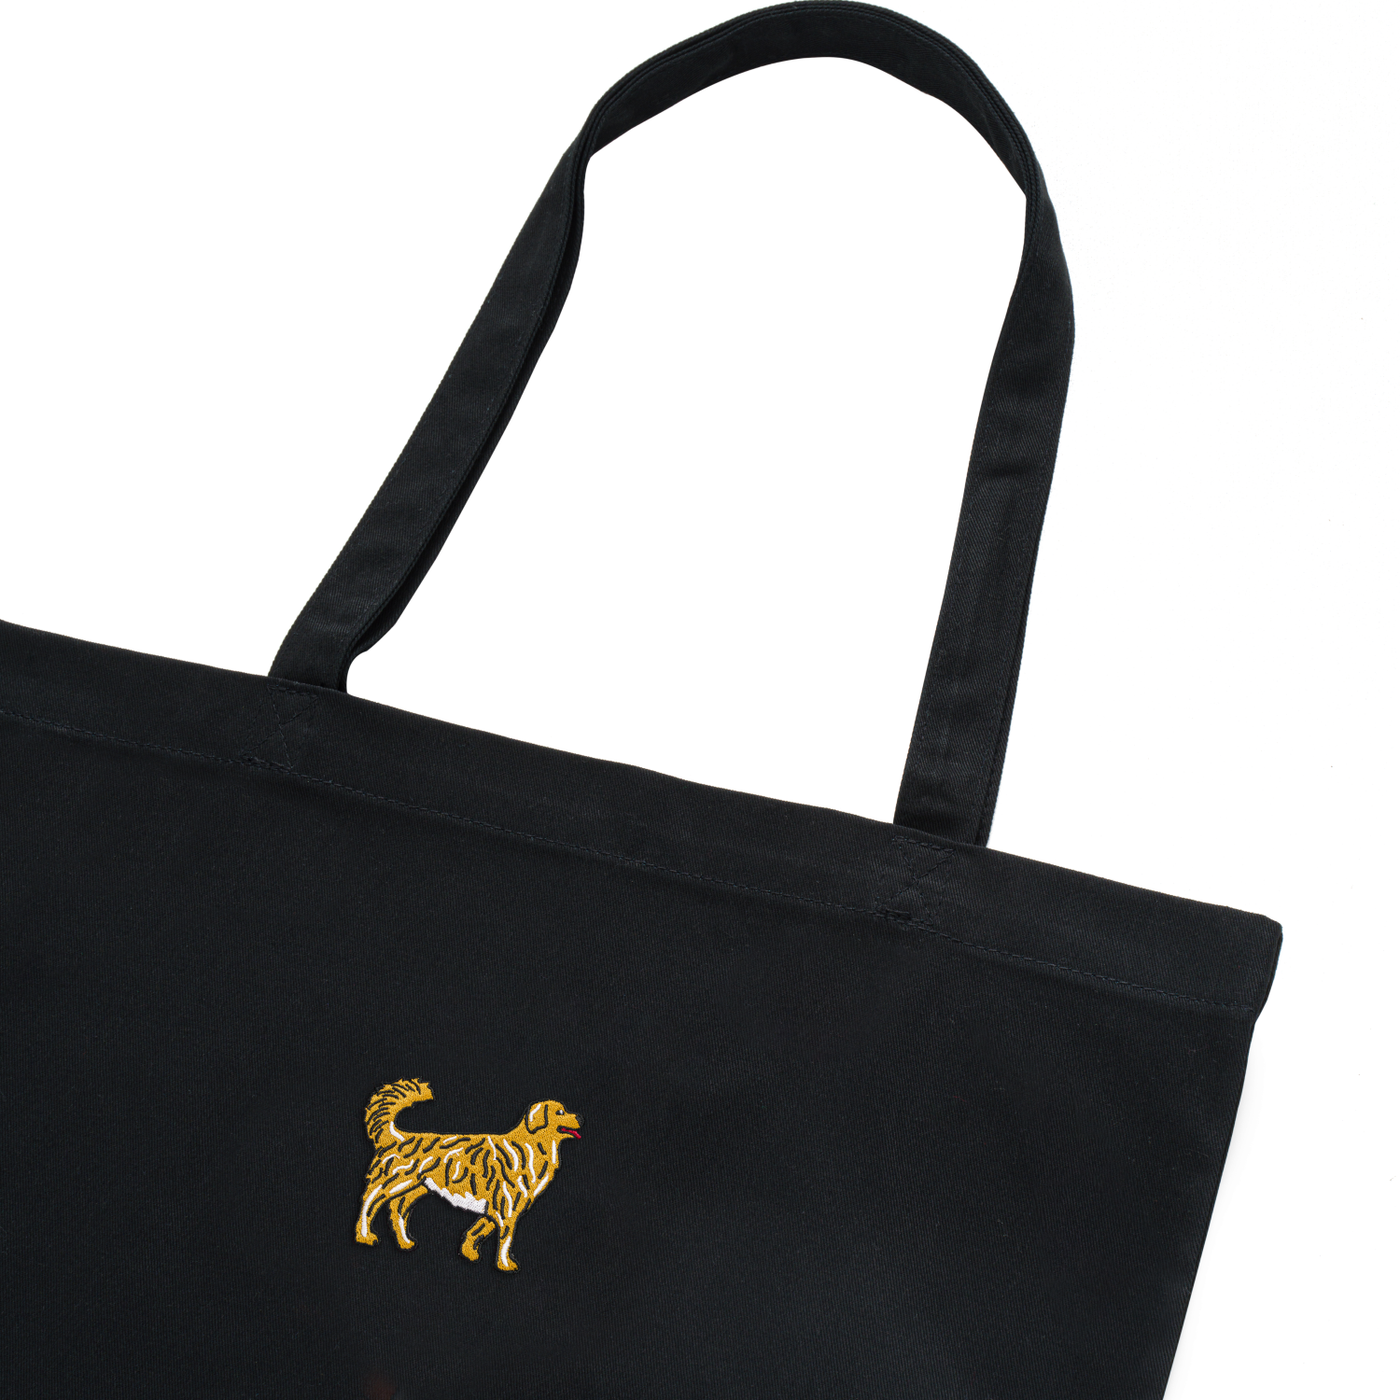 Bobby's Planet Embroidered Golden Retriever Tote Bag from Paws Dog Cat Animals Collection in Black Color#color_black